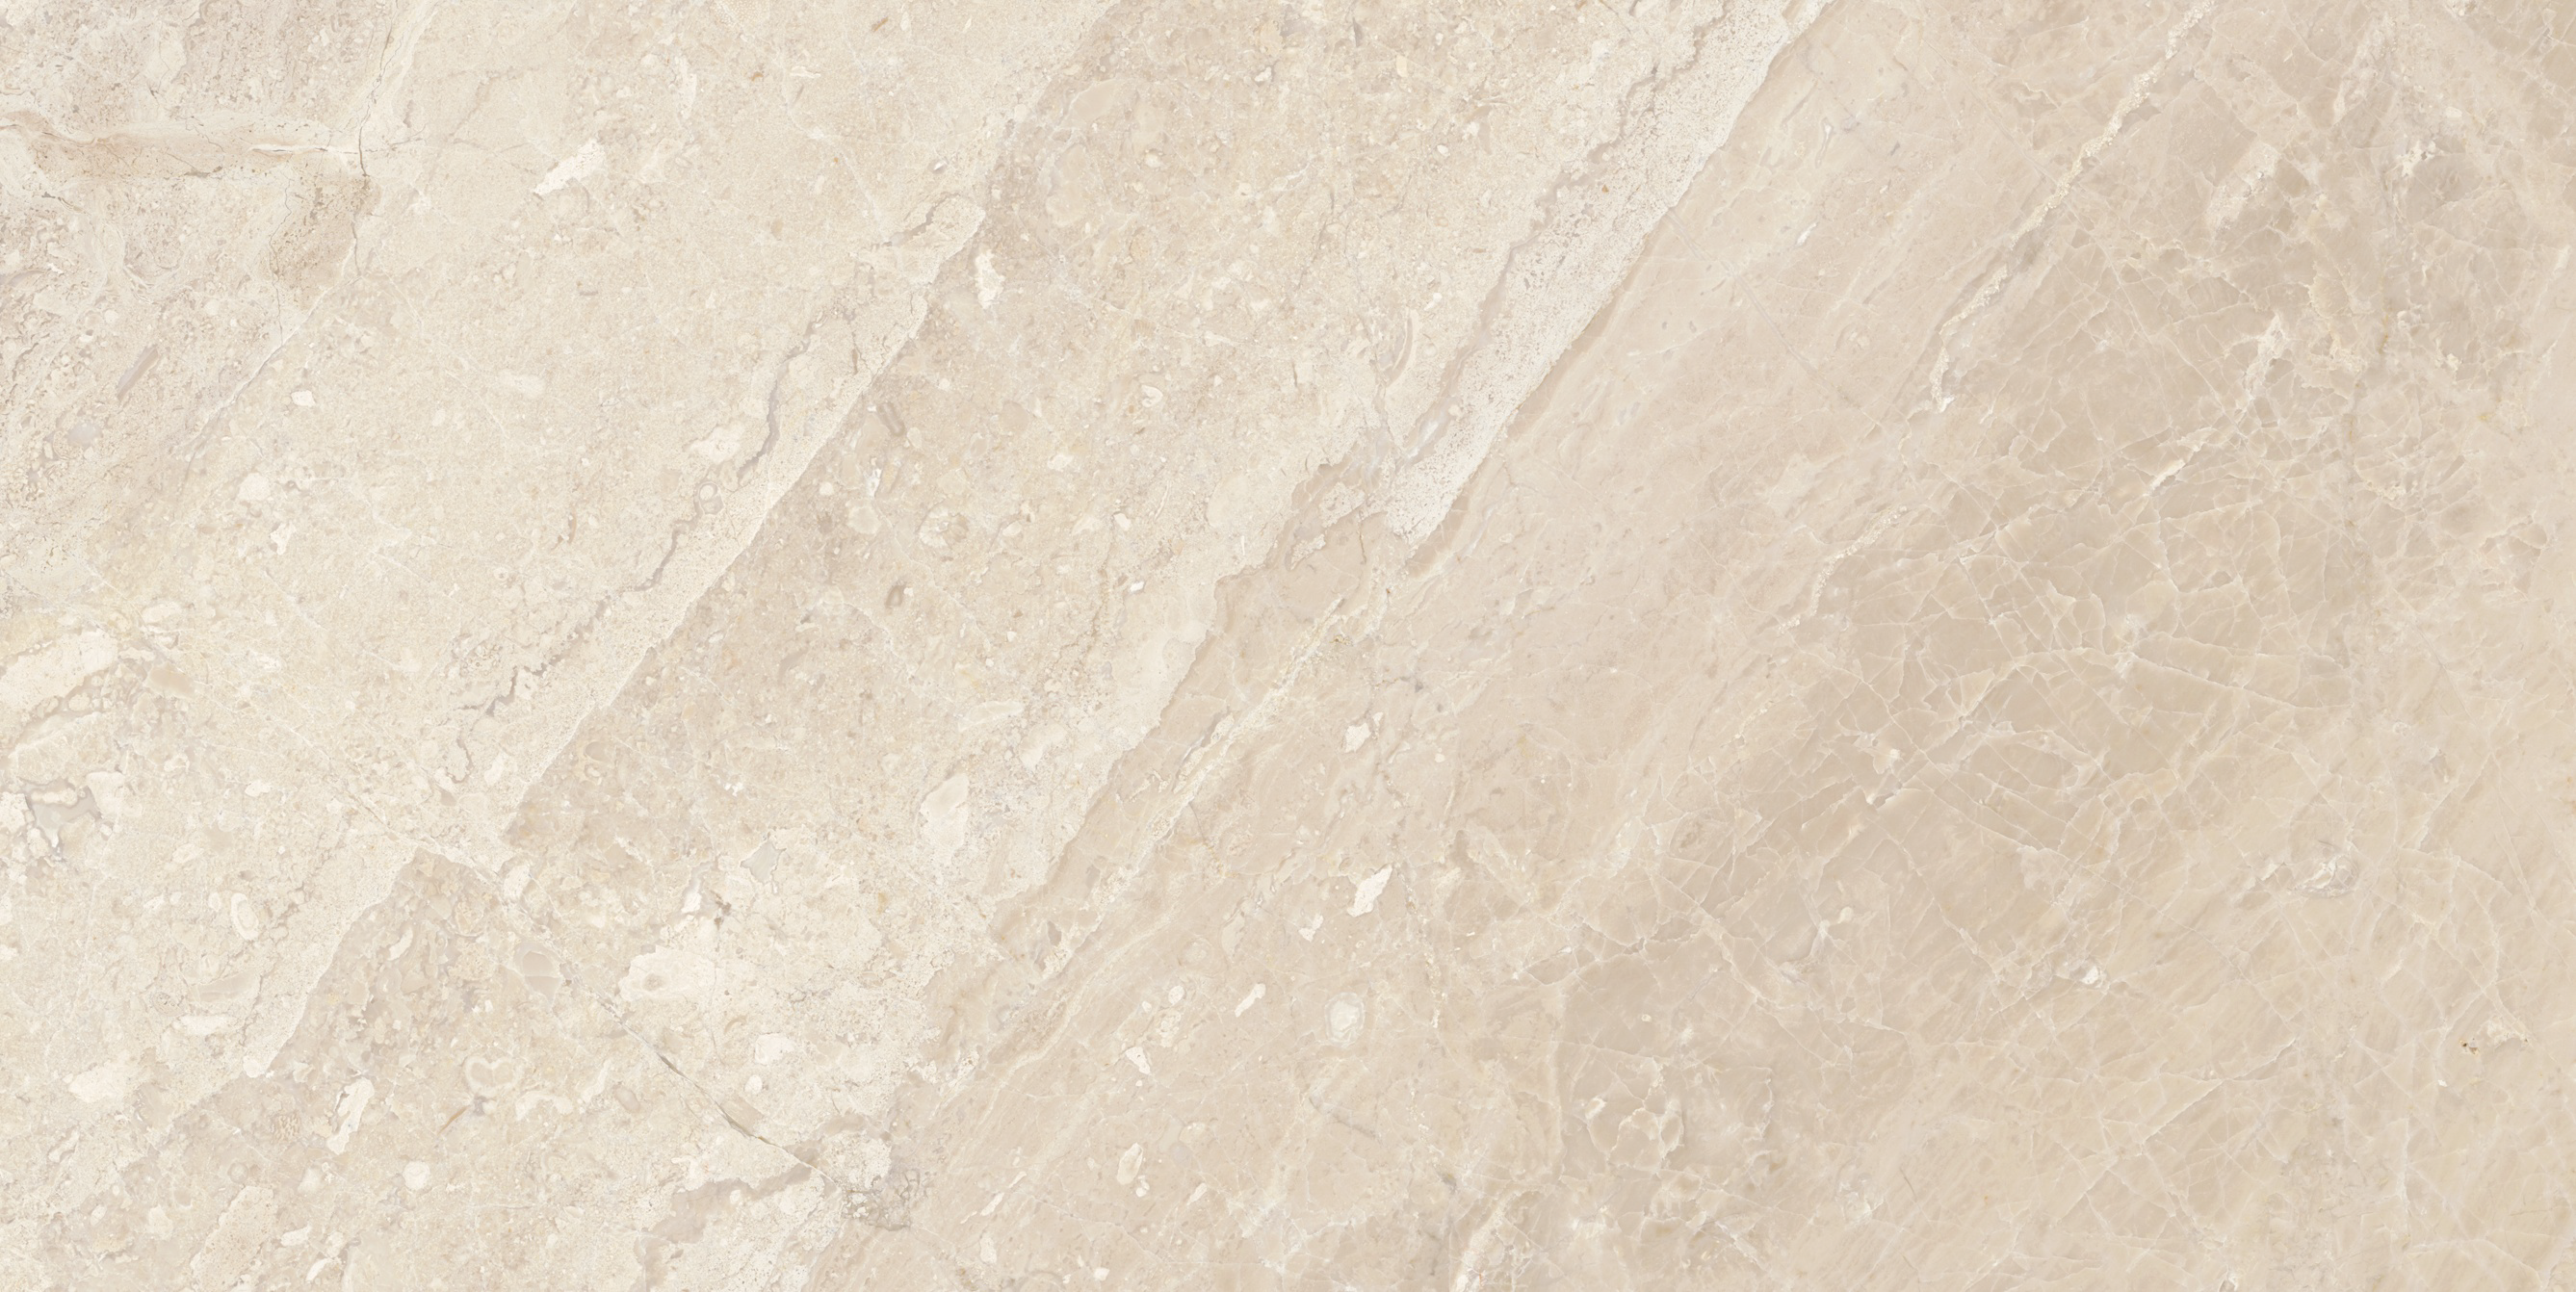 marble pattern natural stone field tile from impero reale anatolia collection distributed by surface group international honed finish straight edge edge 12x24 rectangle shape